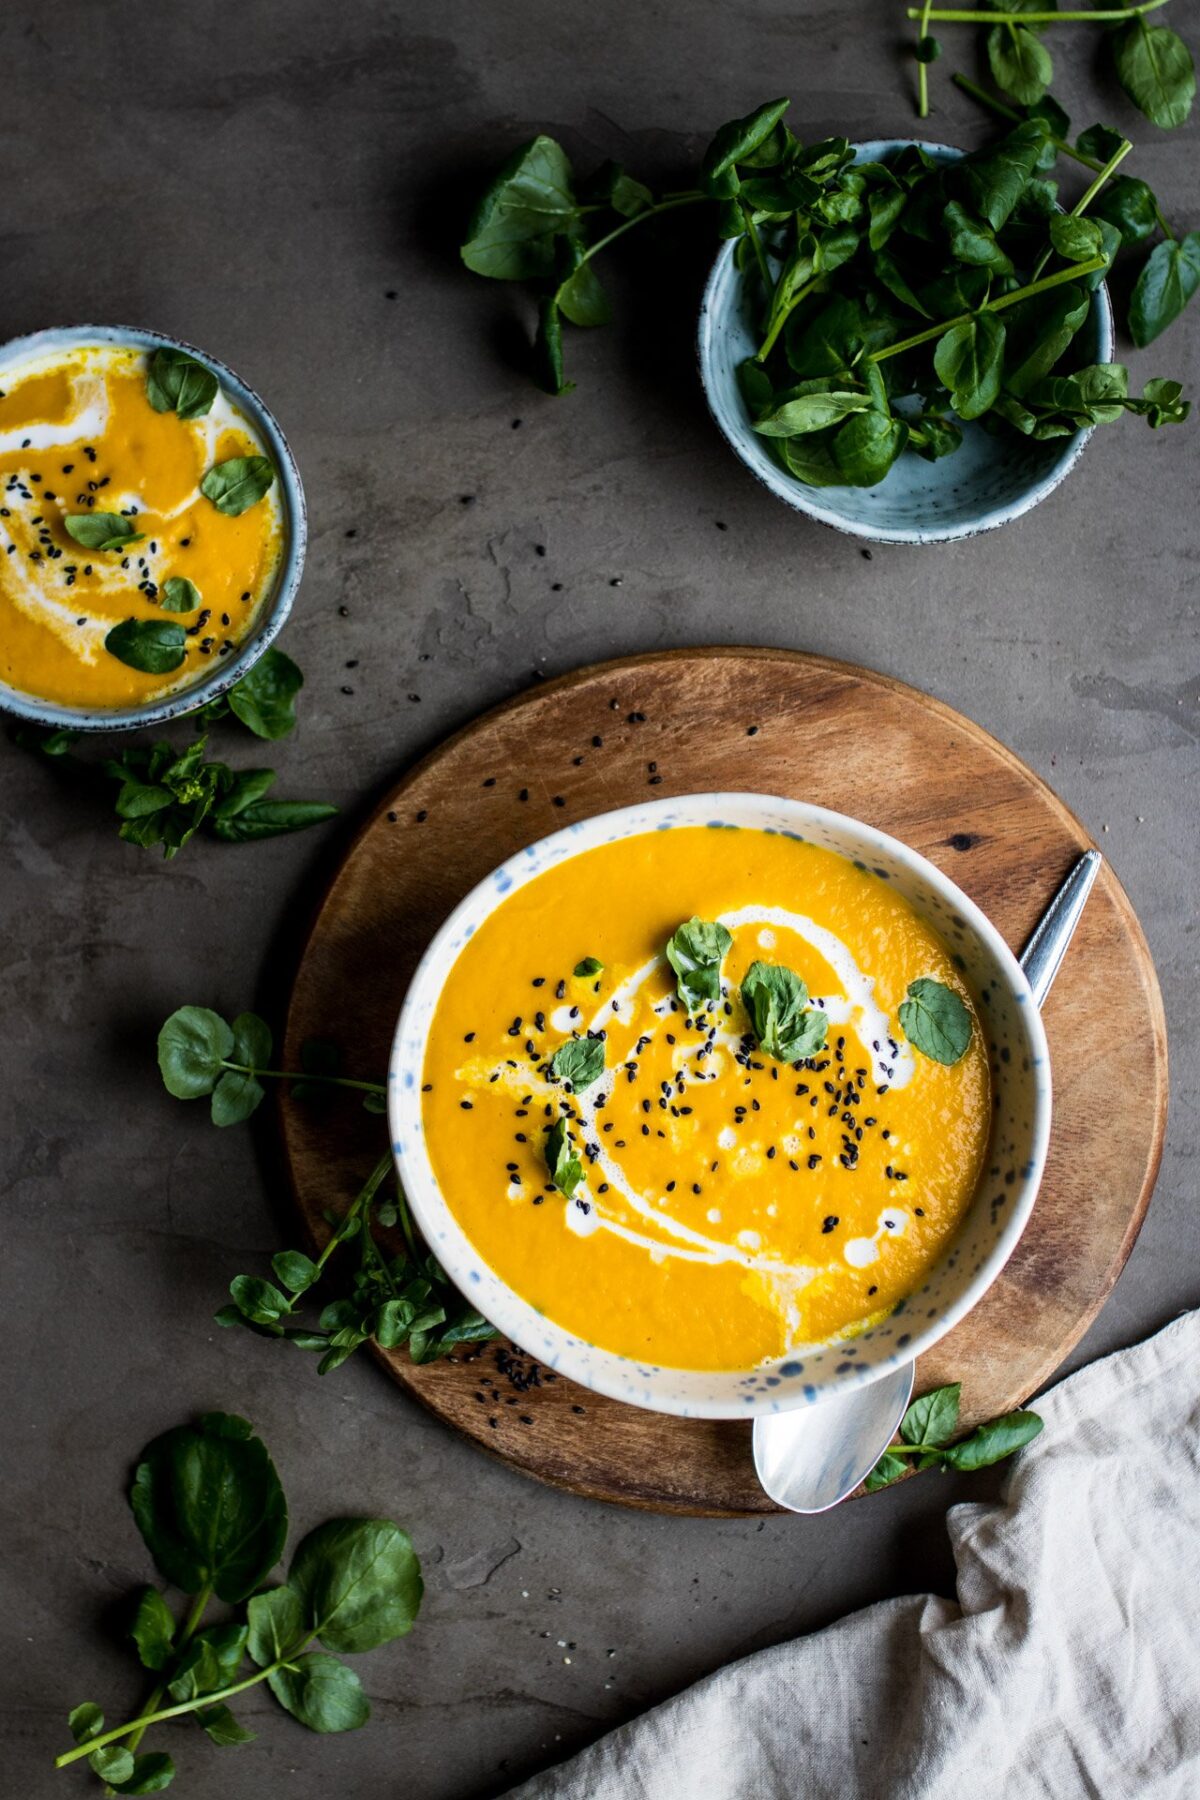 A bowl of turmeric soup with coconut milk drizzled in it. The bowl is on a wooden platter with a smaller bowl of turmeric soup and some herbs.